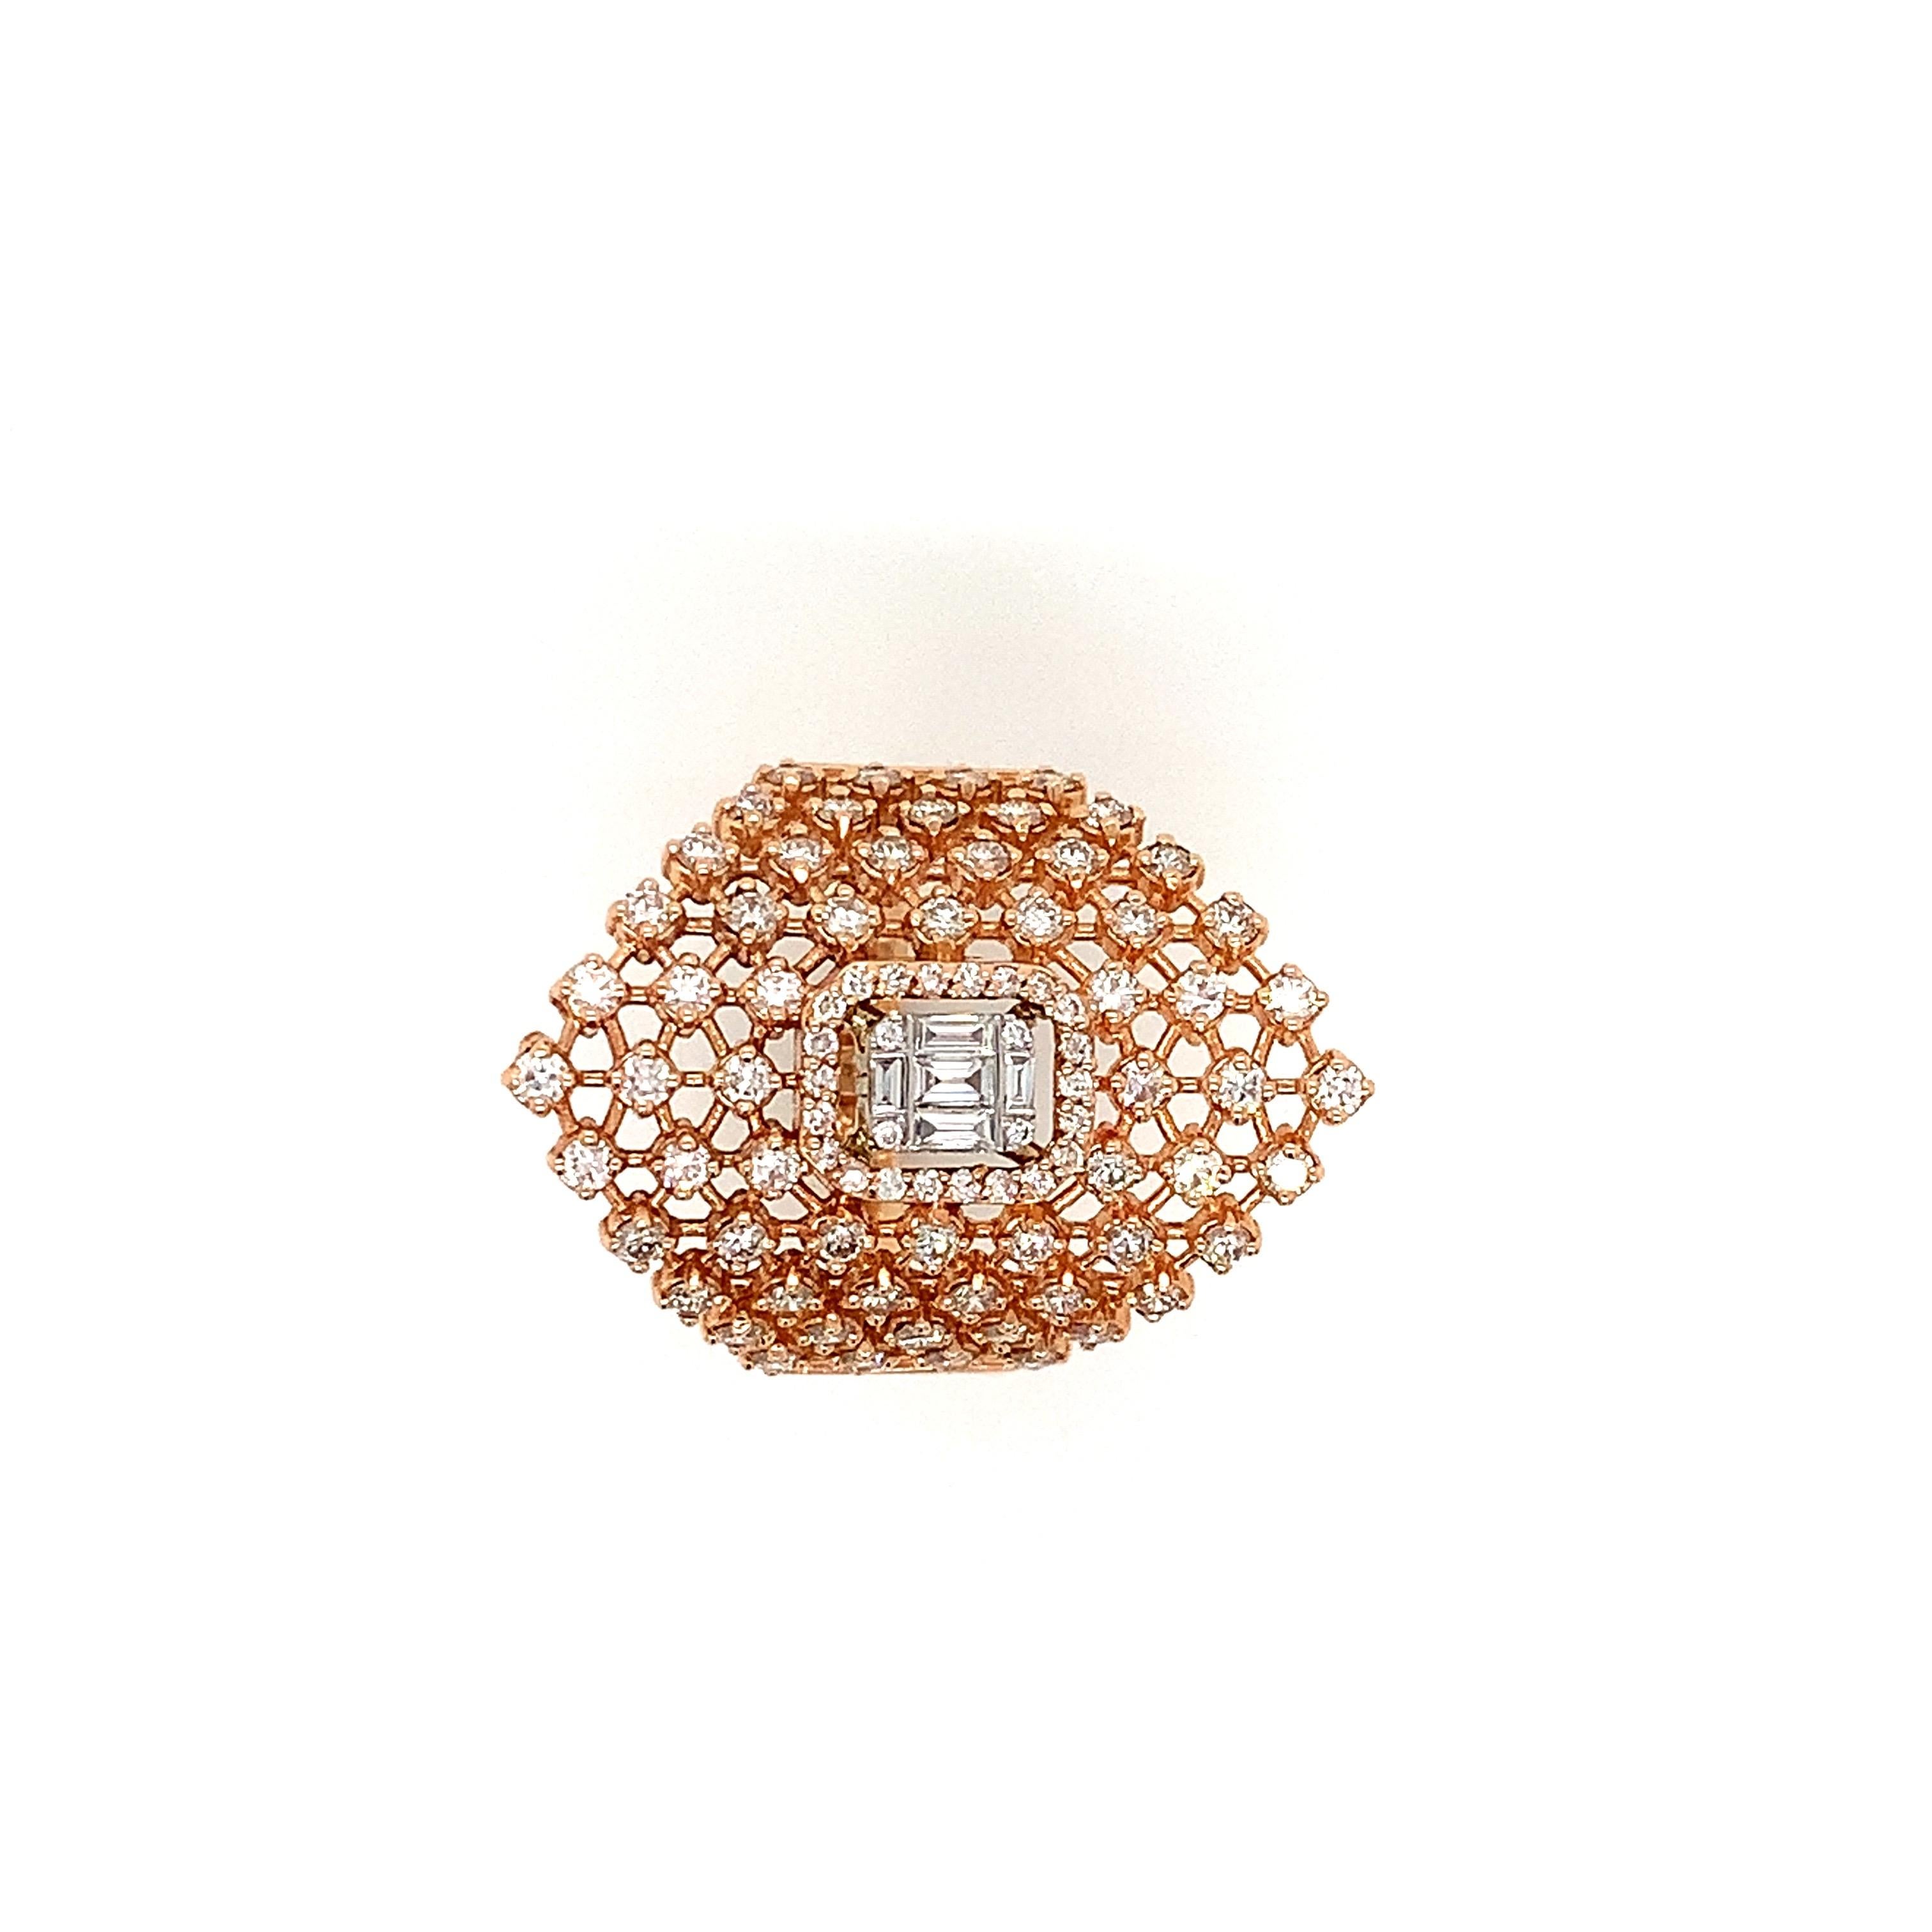 Stunning handmade OWN Your Story 14K Rose Gold Baguette & Brilliant Diamond Lattice Shield Ring. Perfect for an evening out or a just gotta have it right hand ring!  

OWN Your Story brings its 3 generations of family tradition and unparalleled